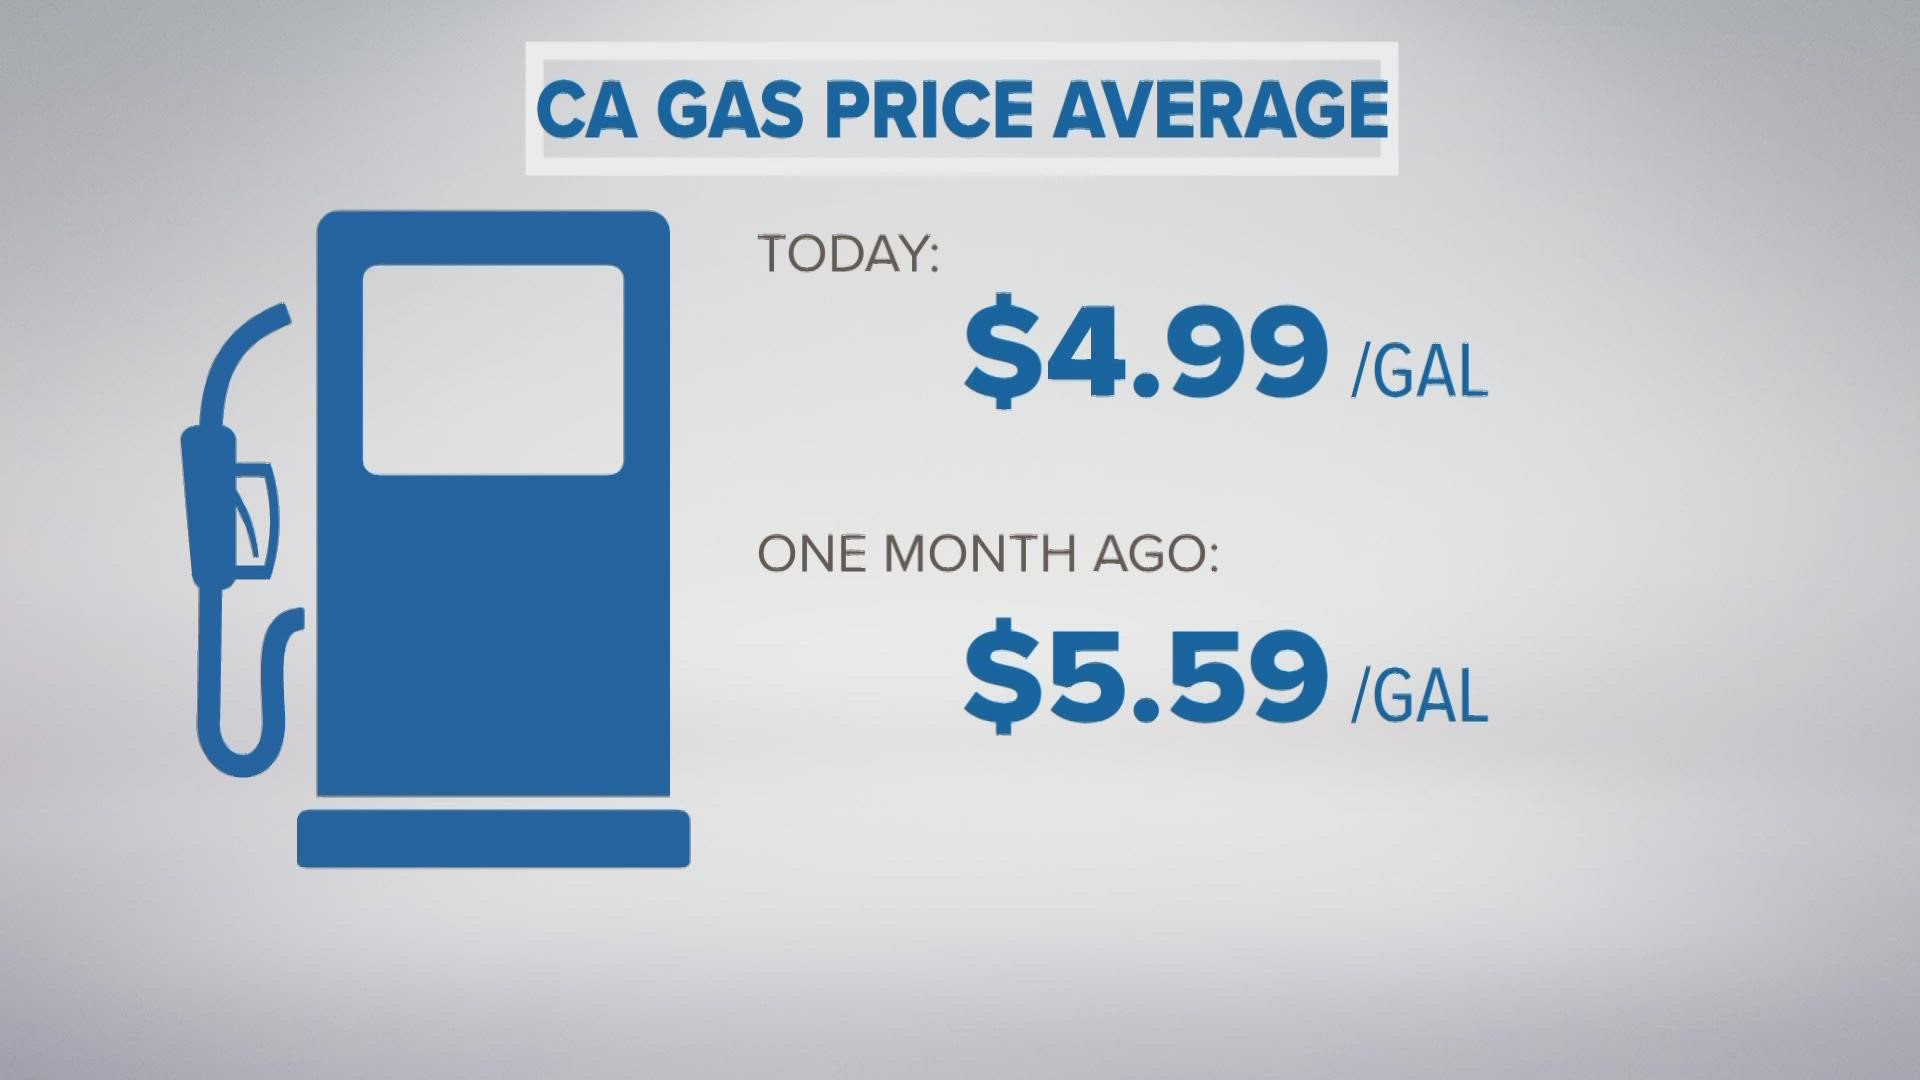 The AAA reports average California fuel costs are at $4.99 per gallon, which is 60 cents lower than just a month before.